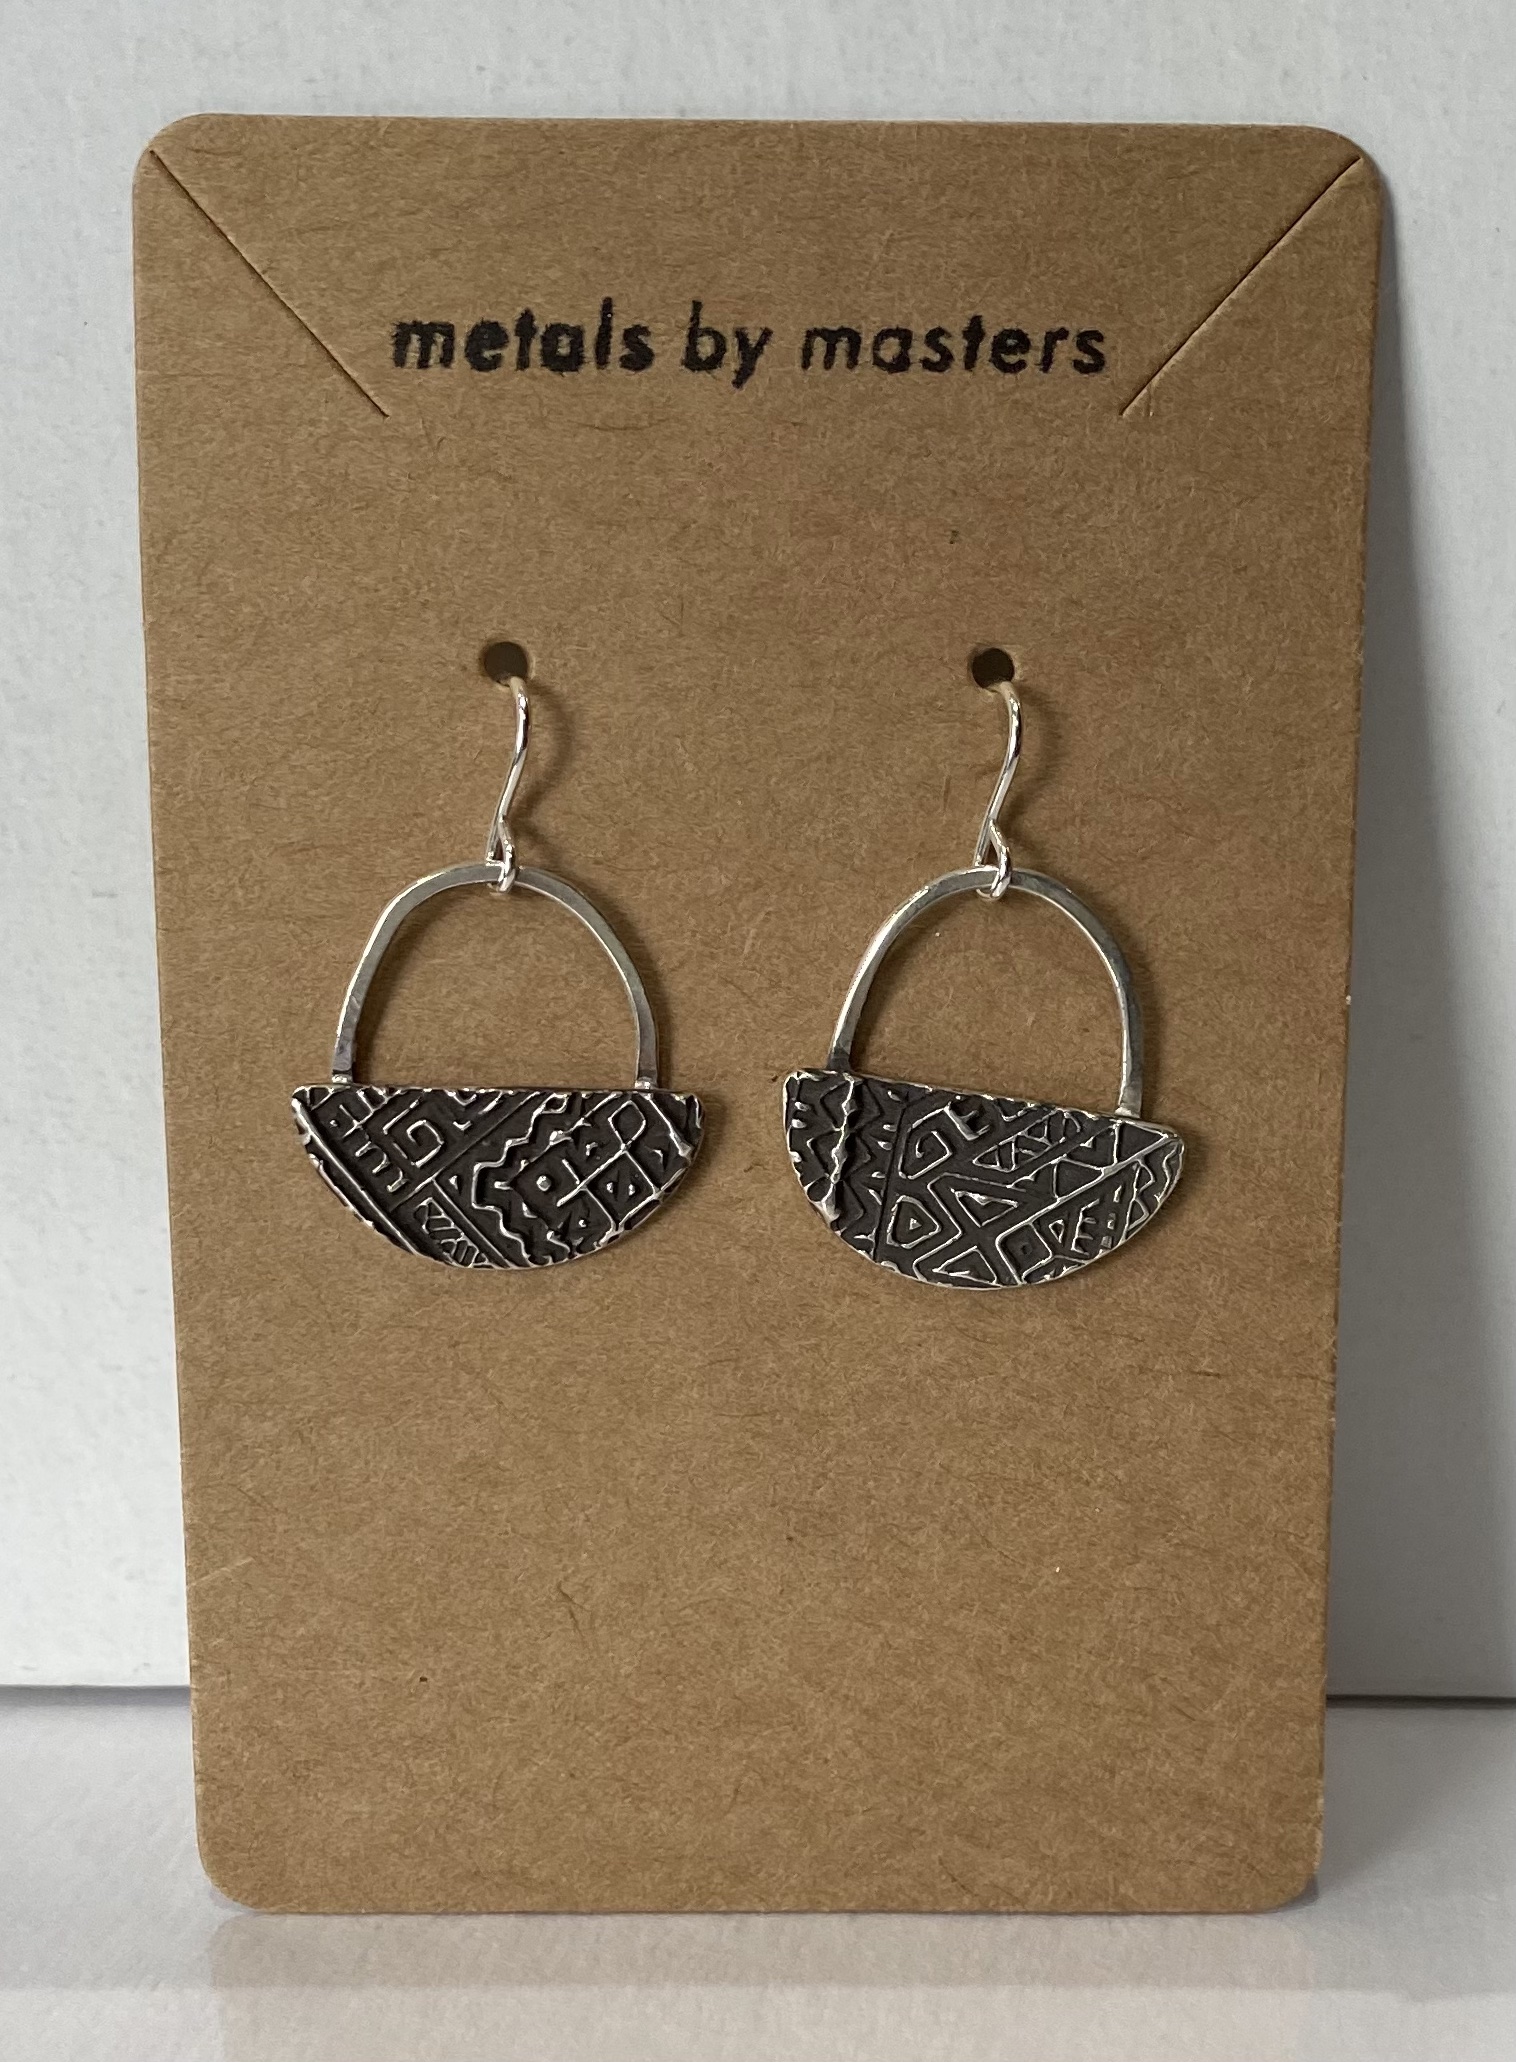 Half Round PMC Earrings
Sterling Silver
$45.